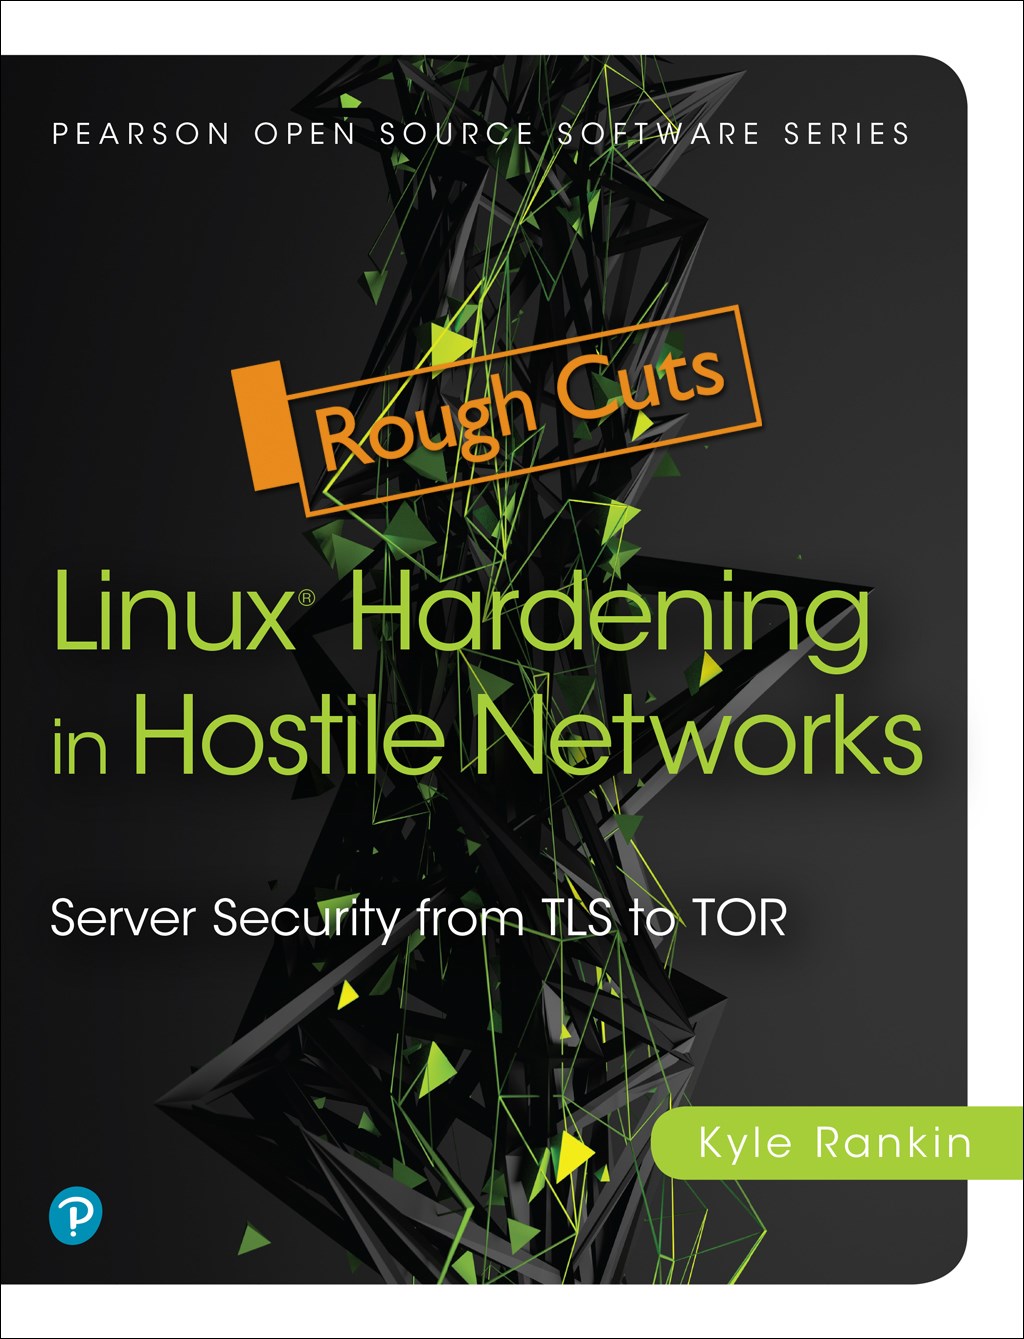 Linux Hardening in Hostile Networks: Server Security from TLS to Tor, Rough Cuts